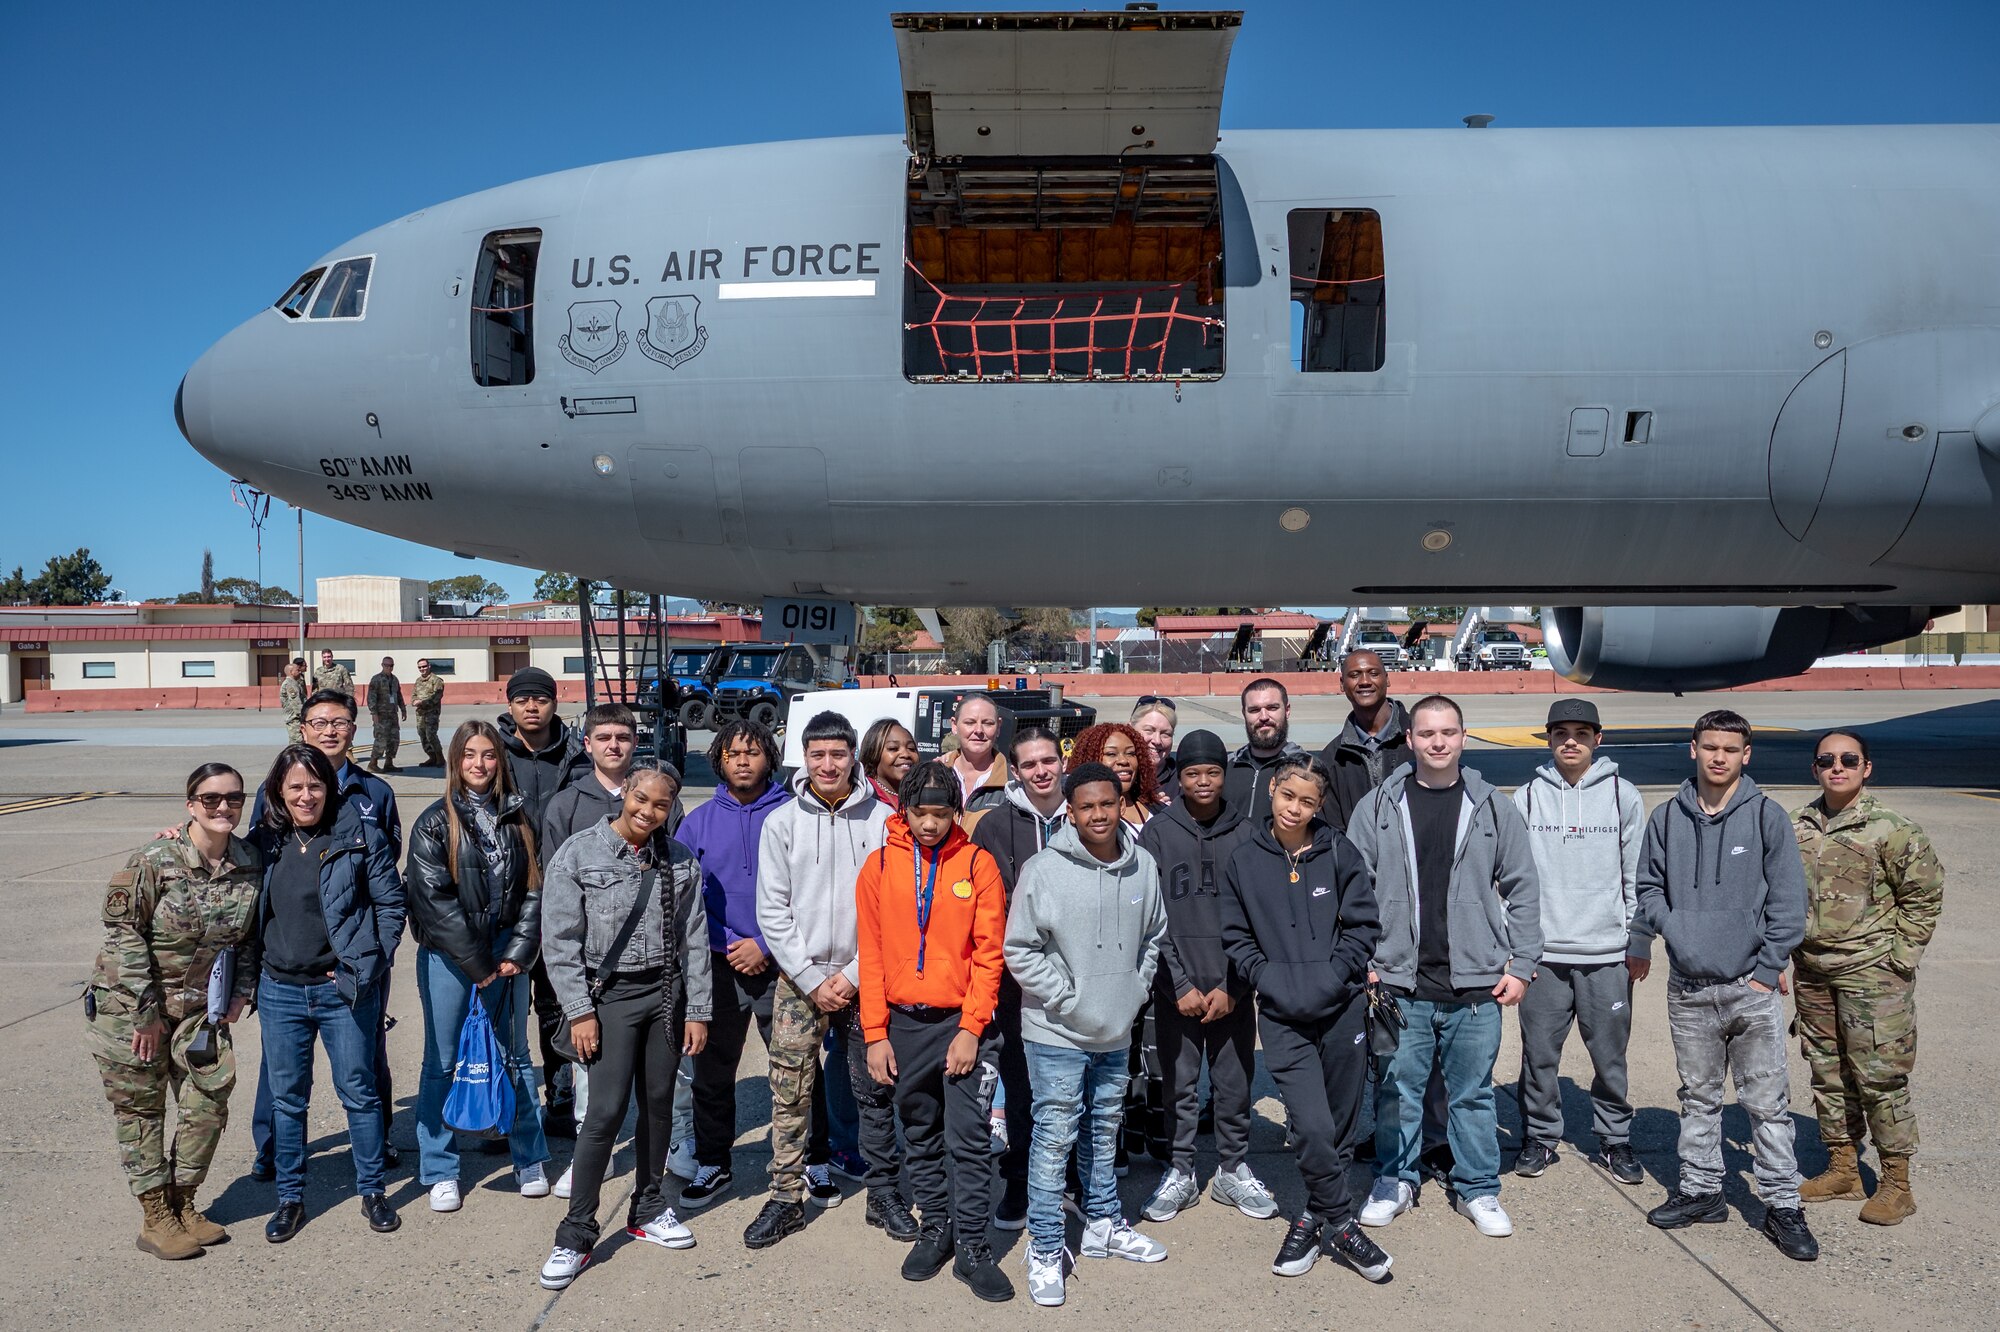 The 349th Air Mobility Wing Development and Training Flight hosted students from the local school district for a tour of Travis AFB.